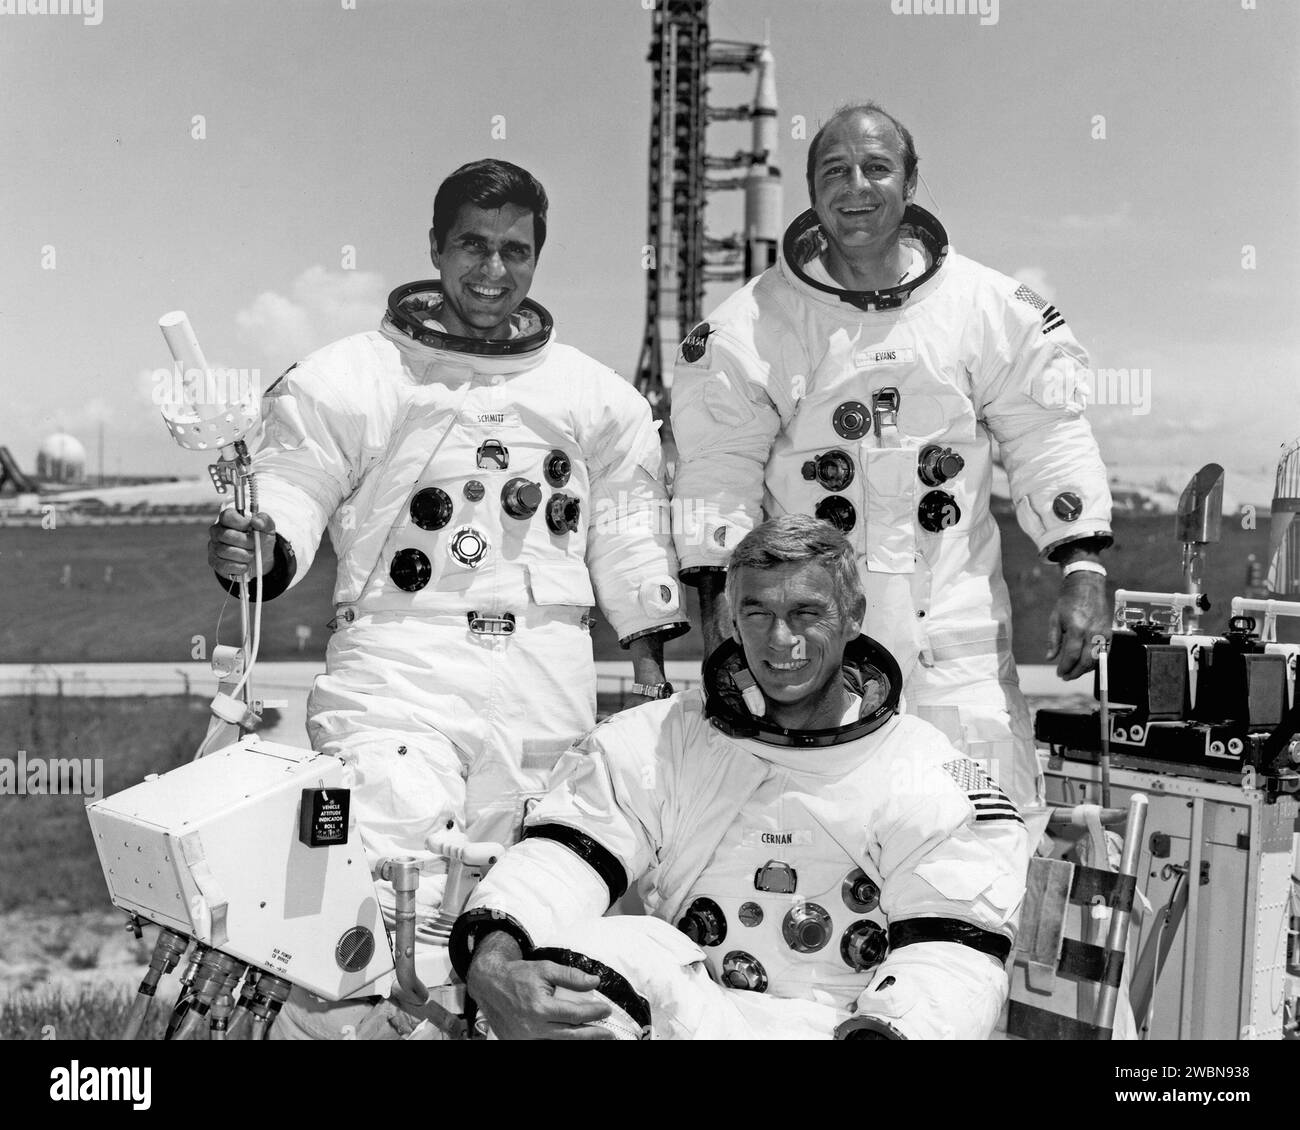 CAPE CANAVERAL, Fla. -- The Apollo 17 crew took time out from training to pose for the press after the Space Vehicle for their Manned Lunar Landing Mission was moved to Pad A, Complex 39 today. Apollo 17 Commander Eugene A Cernan sits at the controls of the One-G Lunar Roving Vehicle Simulator used to simulate operations on the Moon’s surface. With Cernan are Lunar Module Pilot Dr. Harrison H. “Jack” Schmitt, left and Command Module Plot Ronald A. Evans. The Apollo 17 Space Vehicle, scheduled for launch from KSC on the sixth U.S. Manned Lunar Landing Mission on December 6, 1972 is in the backg Stock Photo